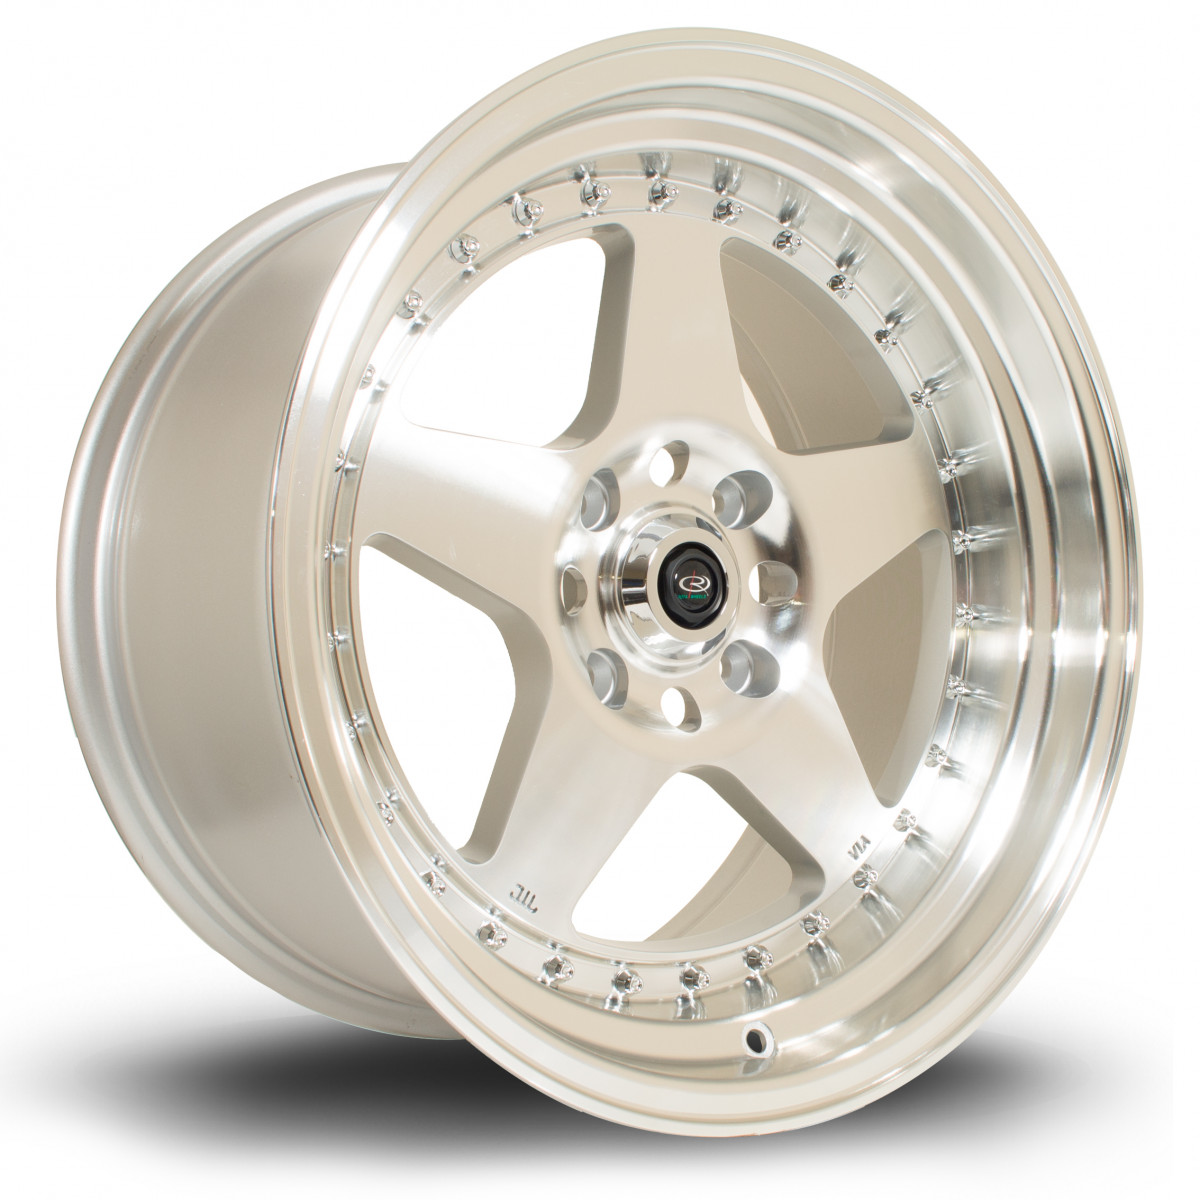 Kyusha 17x9.5 4x114 ET12 Silver with Polished Face